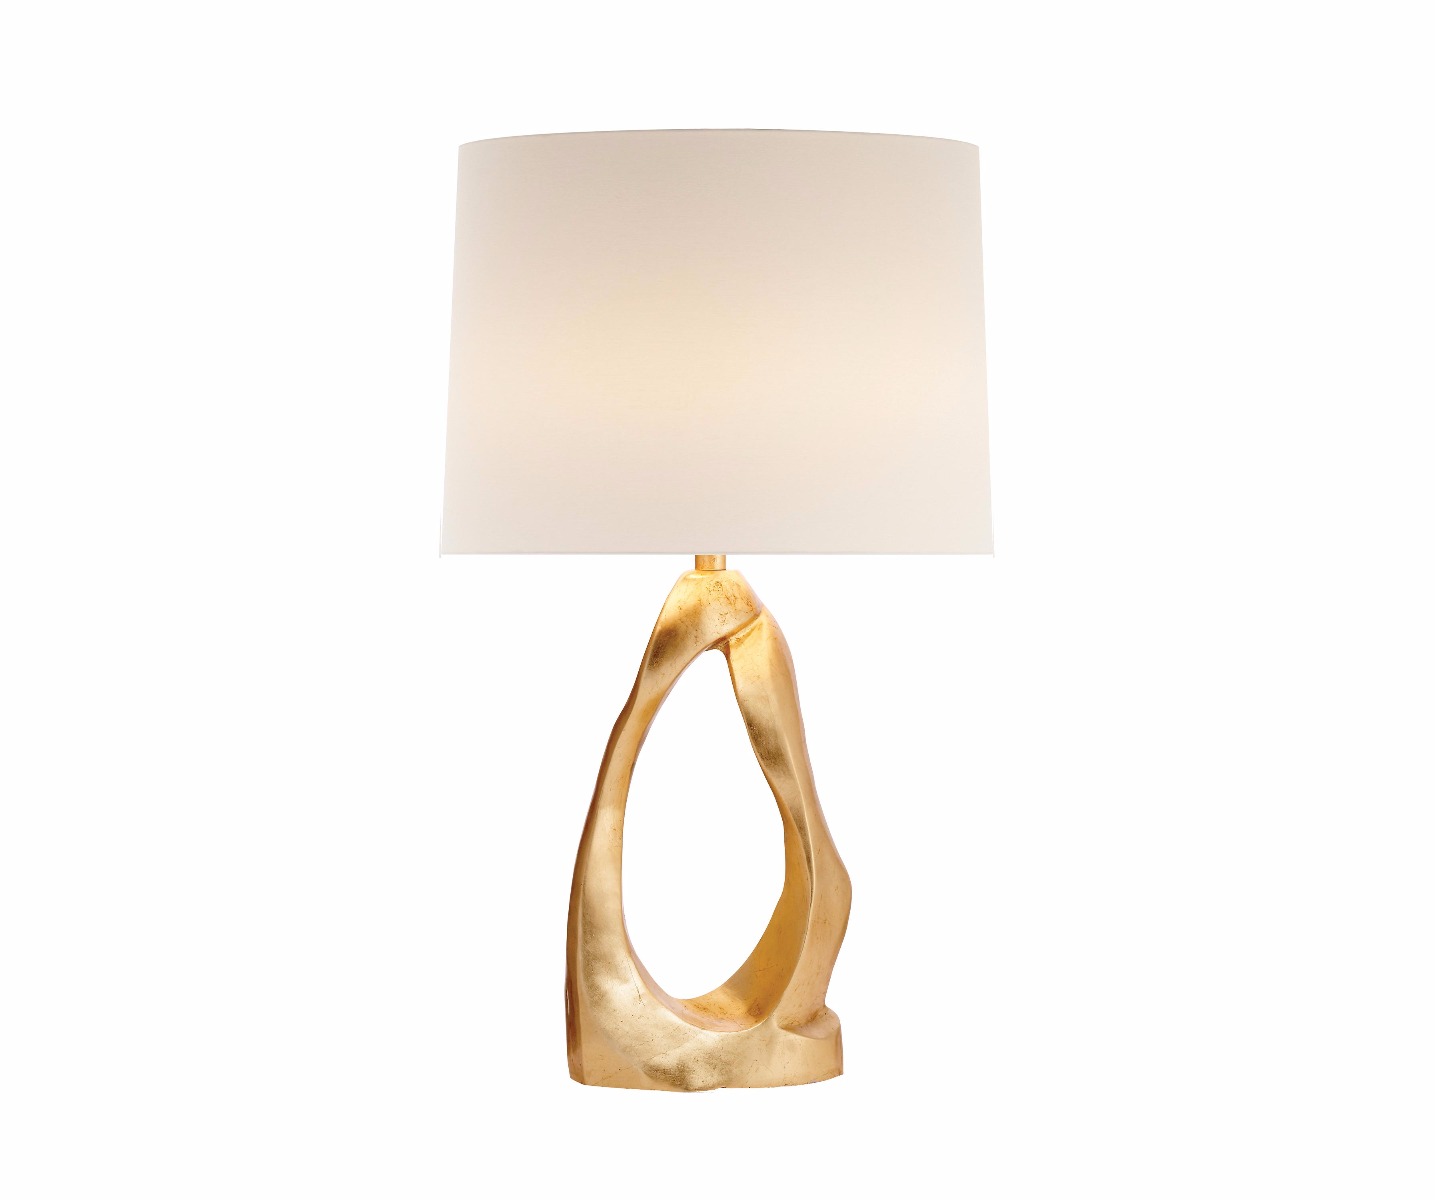 Unique luxury desk lamp with gold stand by luxuria london